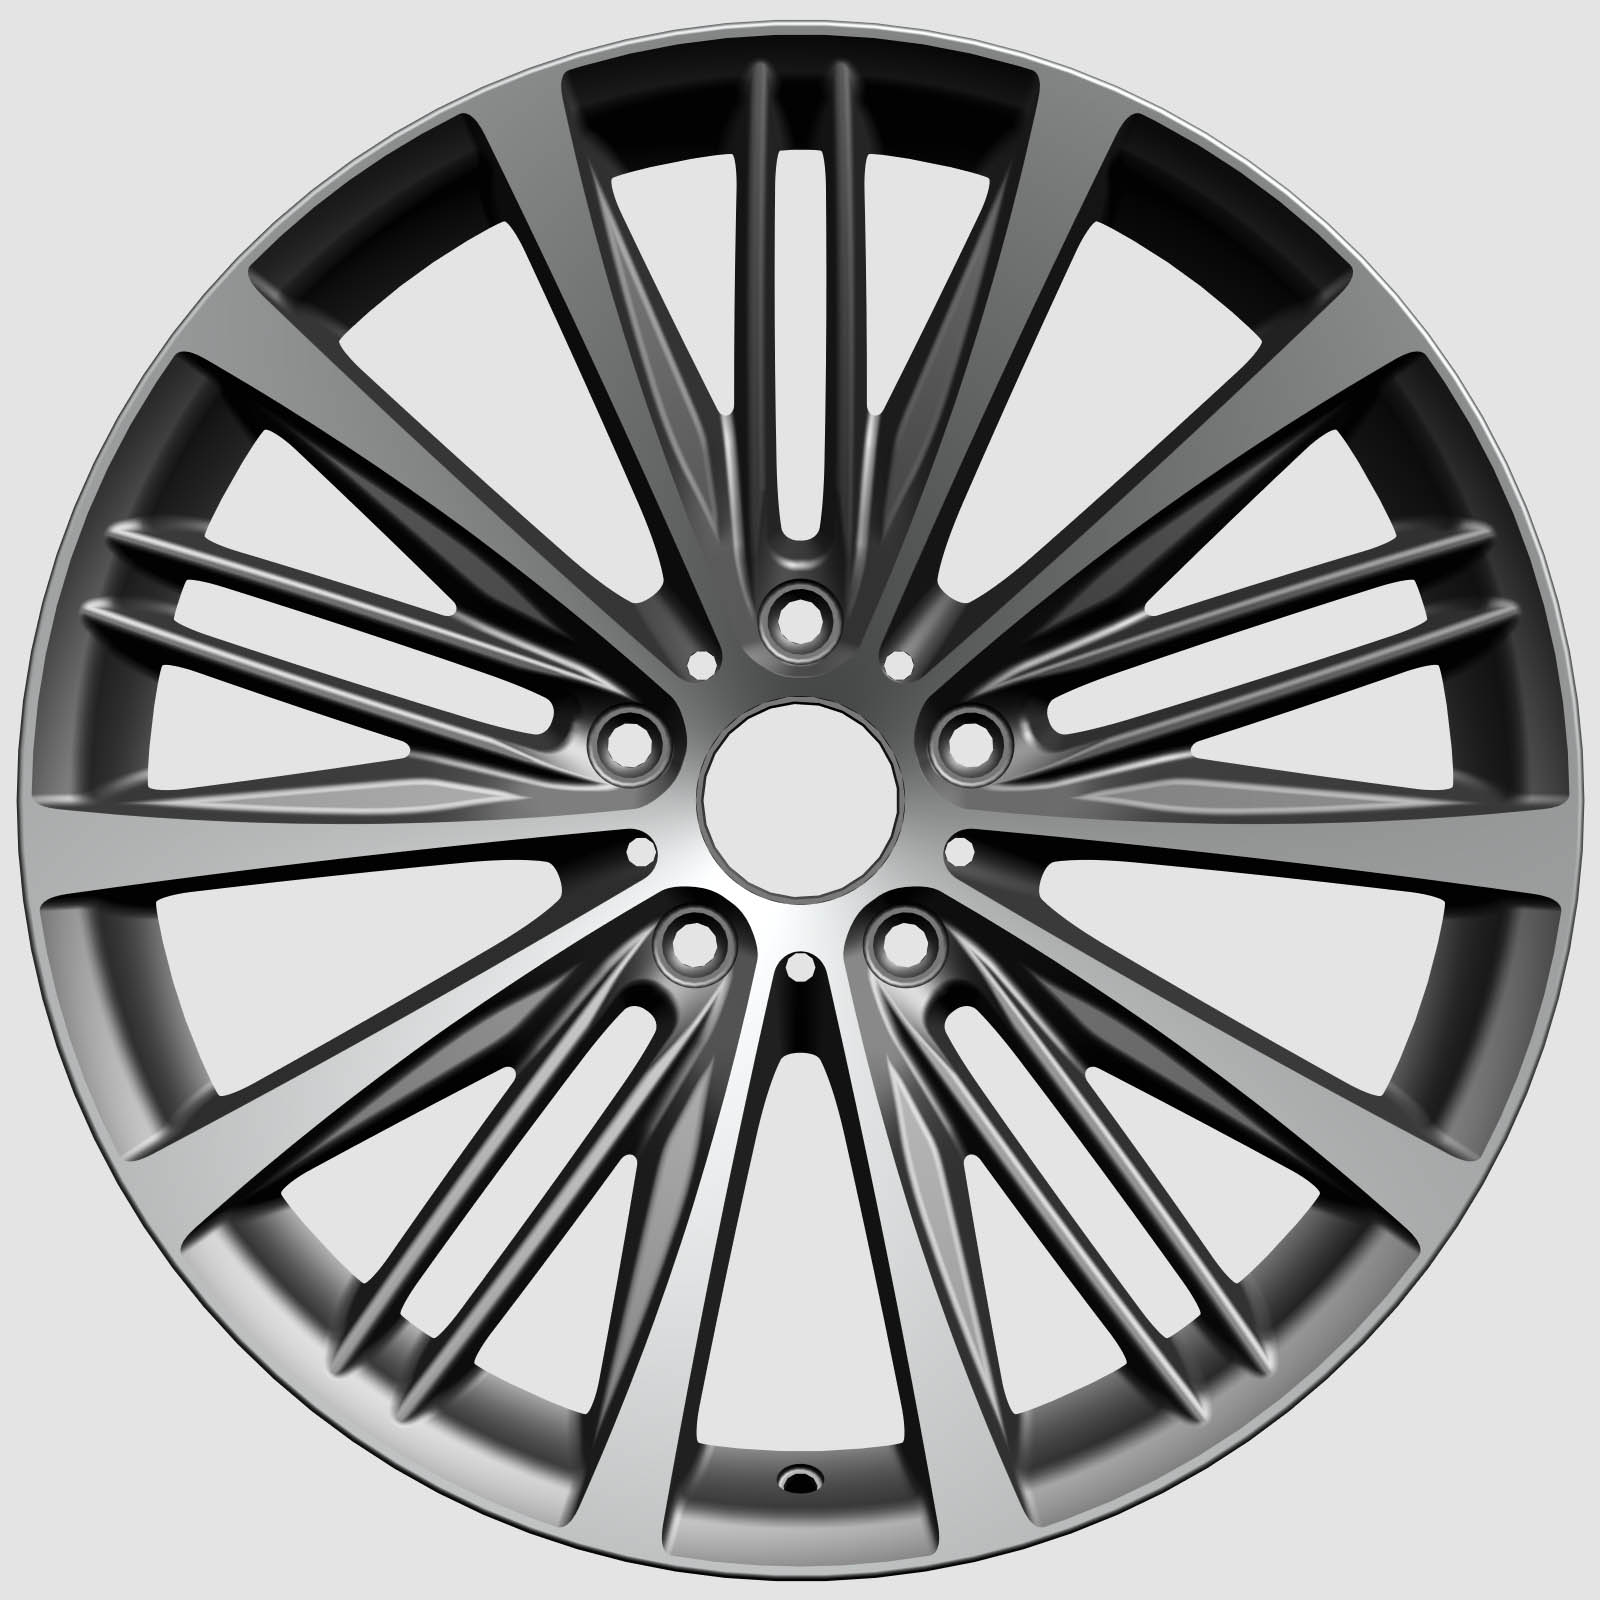 Aluminum Customized Forged Alloy Wheels for Passenger Car   HQ3 Featured Image